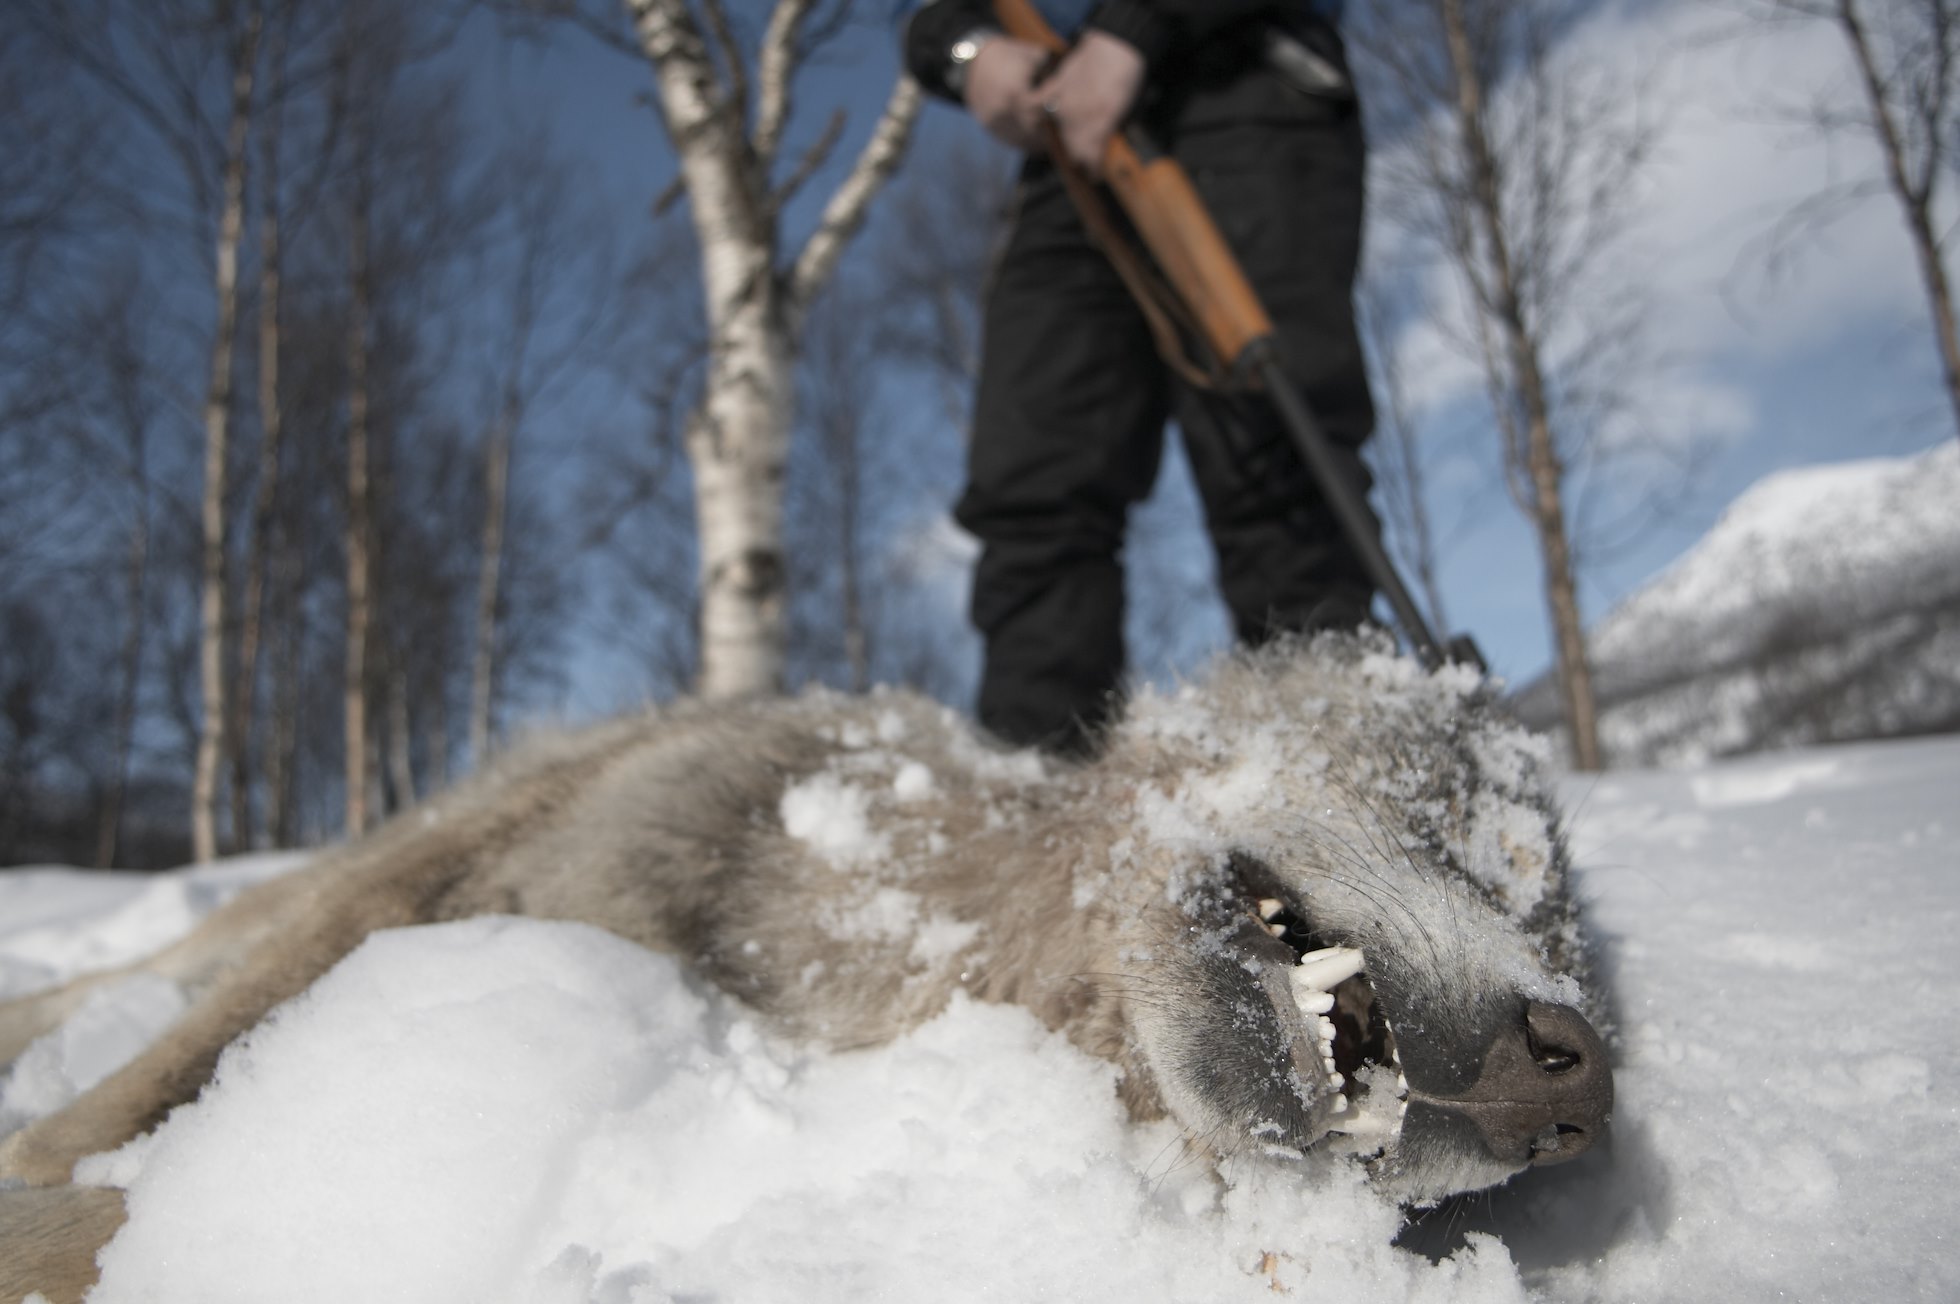 European wolf (Canis lupis) lies dead after Norwegian government sanctioned wolf cull, Hedmark, Norway